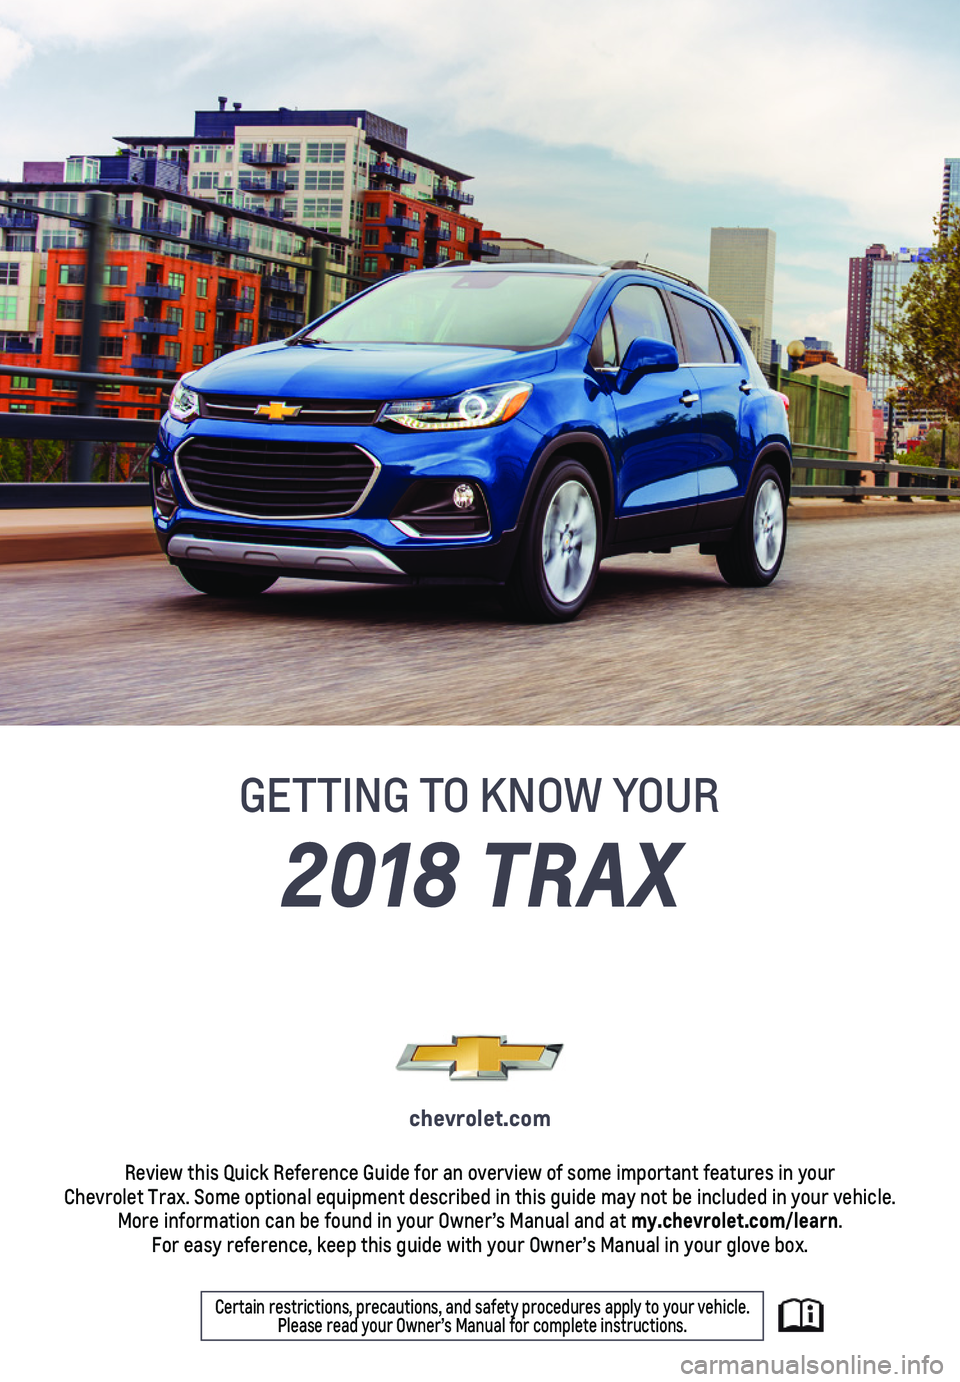 CHEVROLET TRAX 2018  Get To Know Guide 1
2018 TRAX
GETTING TO KNOW YOUR
chevrolet.com
Review this Quick Reference Guide for an overview of some important feat\
ures in your  Chevrolet Trax. Some optional equipment described in this guide m